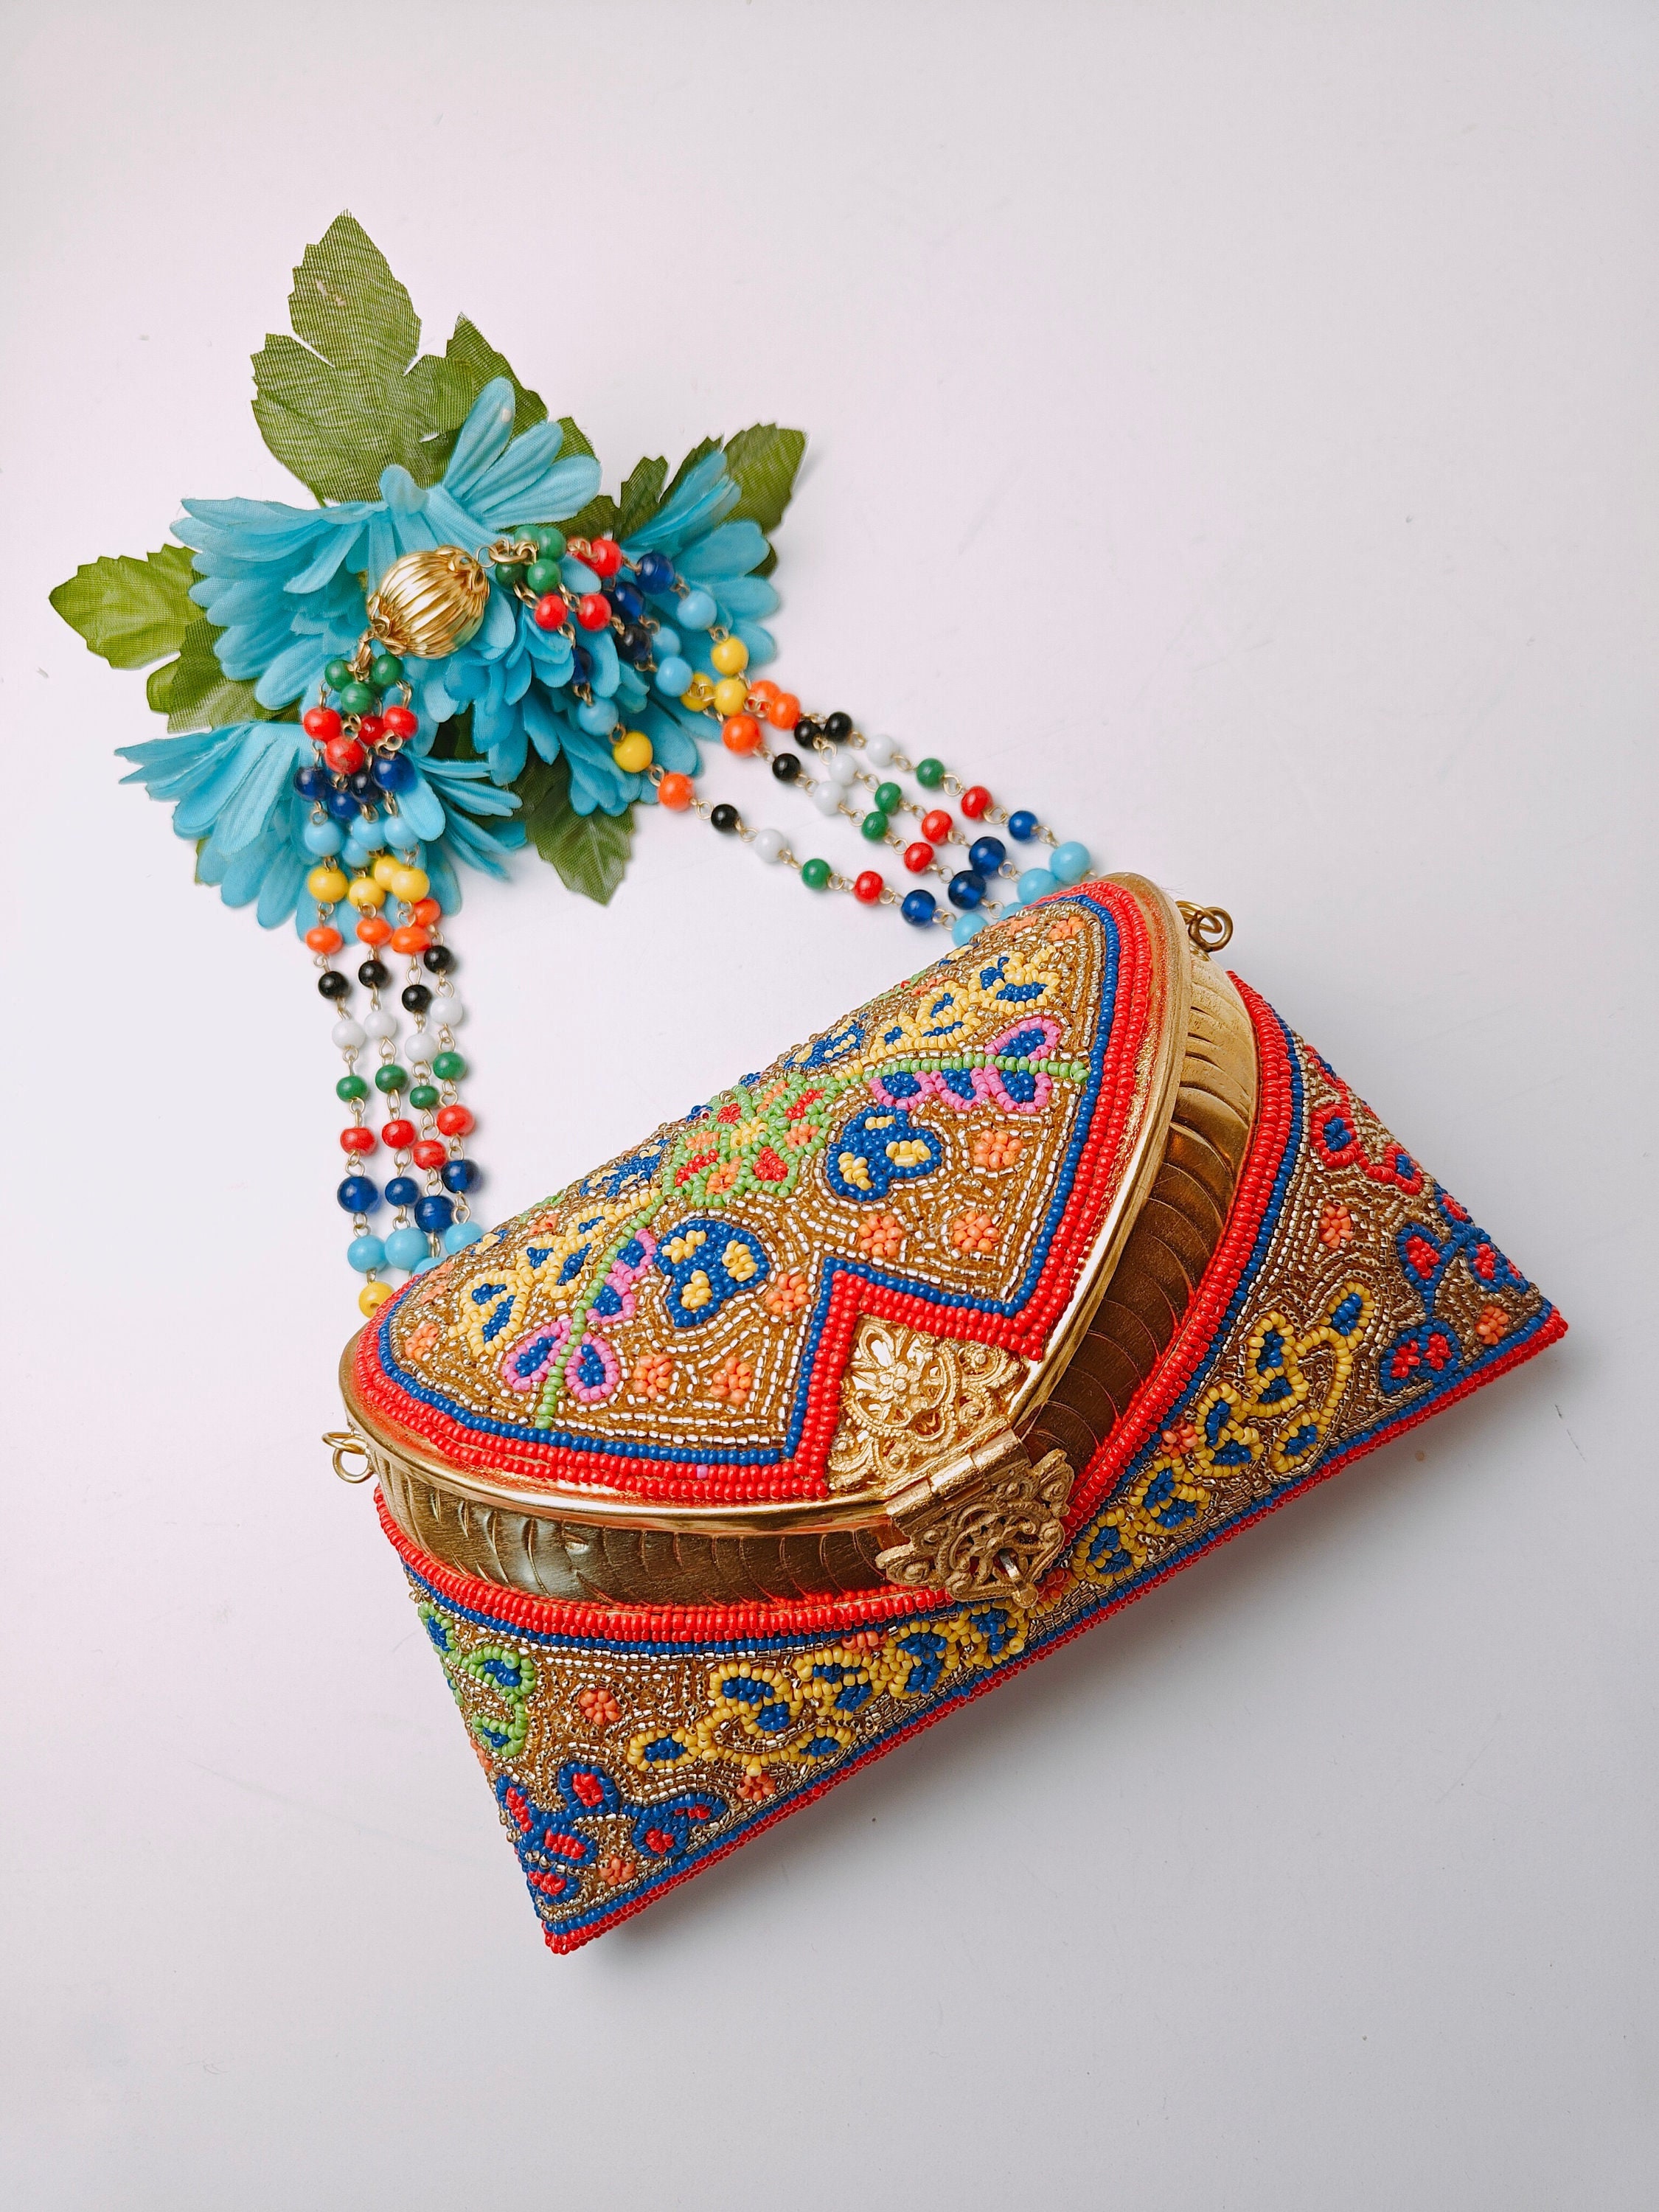 Indian Wedding Favor Return Gift Potli Bag Lot of 5 to 200 Pcs, Wedding  Gift for Guests, Indian Handmade Embroidered Women's Purses Potli - Etsy |  Potli bags, Purses and bags, Bag pattern